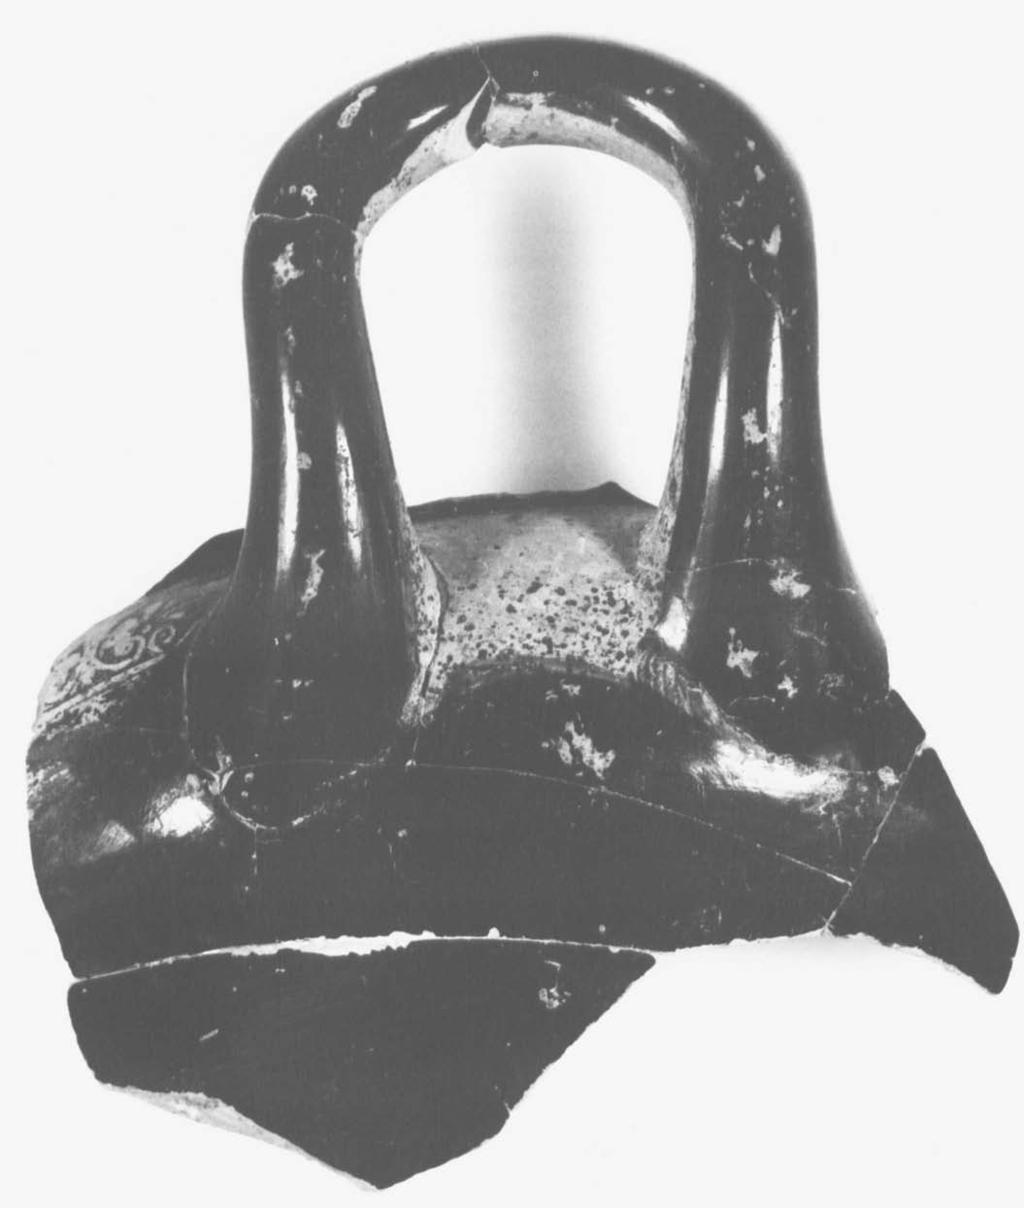 Figure 28. Fragment of a calyx krater.